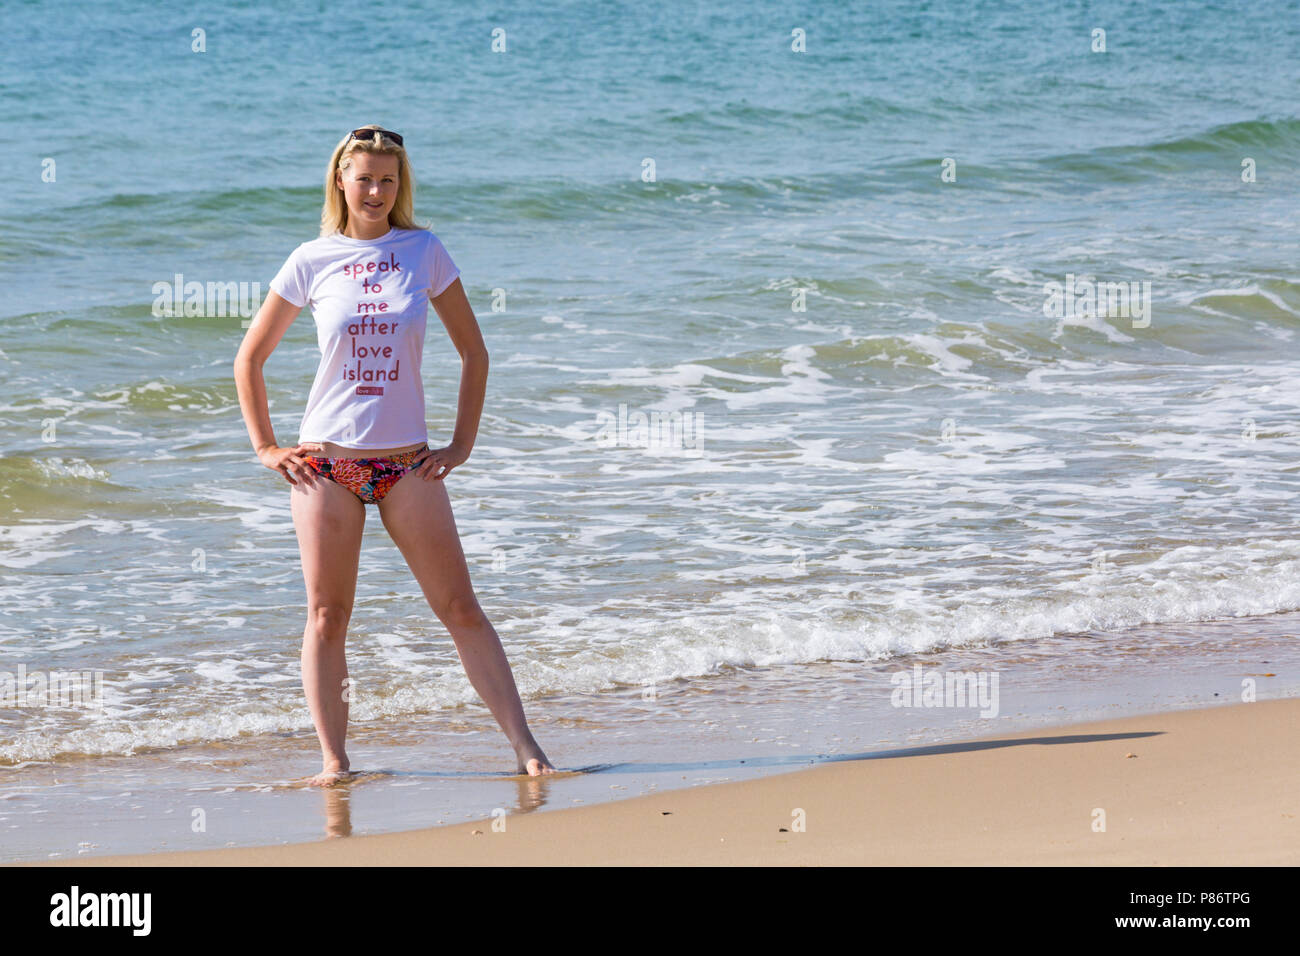 Bournemouth, Dorset, UK. 10th July 2018. UK weather: after a cloudy start, another hot sunny day. Model Leanne Cable enjoys the sunshine at Alum Chine beach. Credit: Carolyn Jenkins/Alamy Live News Stock Photo